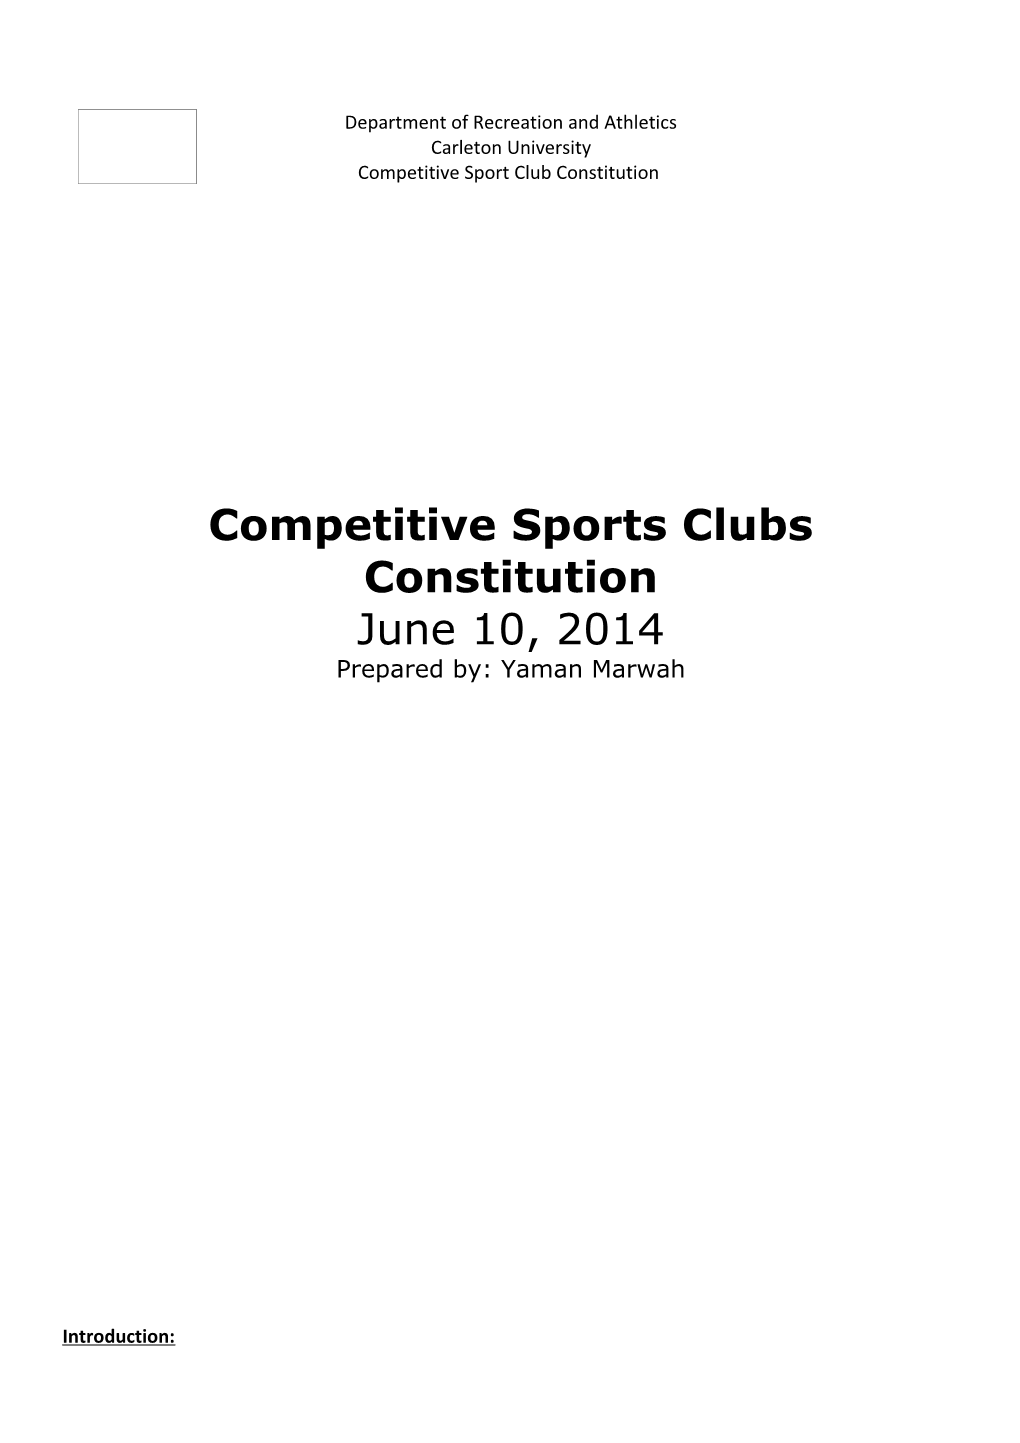 Competitive Sports Clubs Constitution